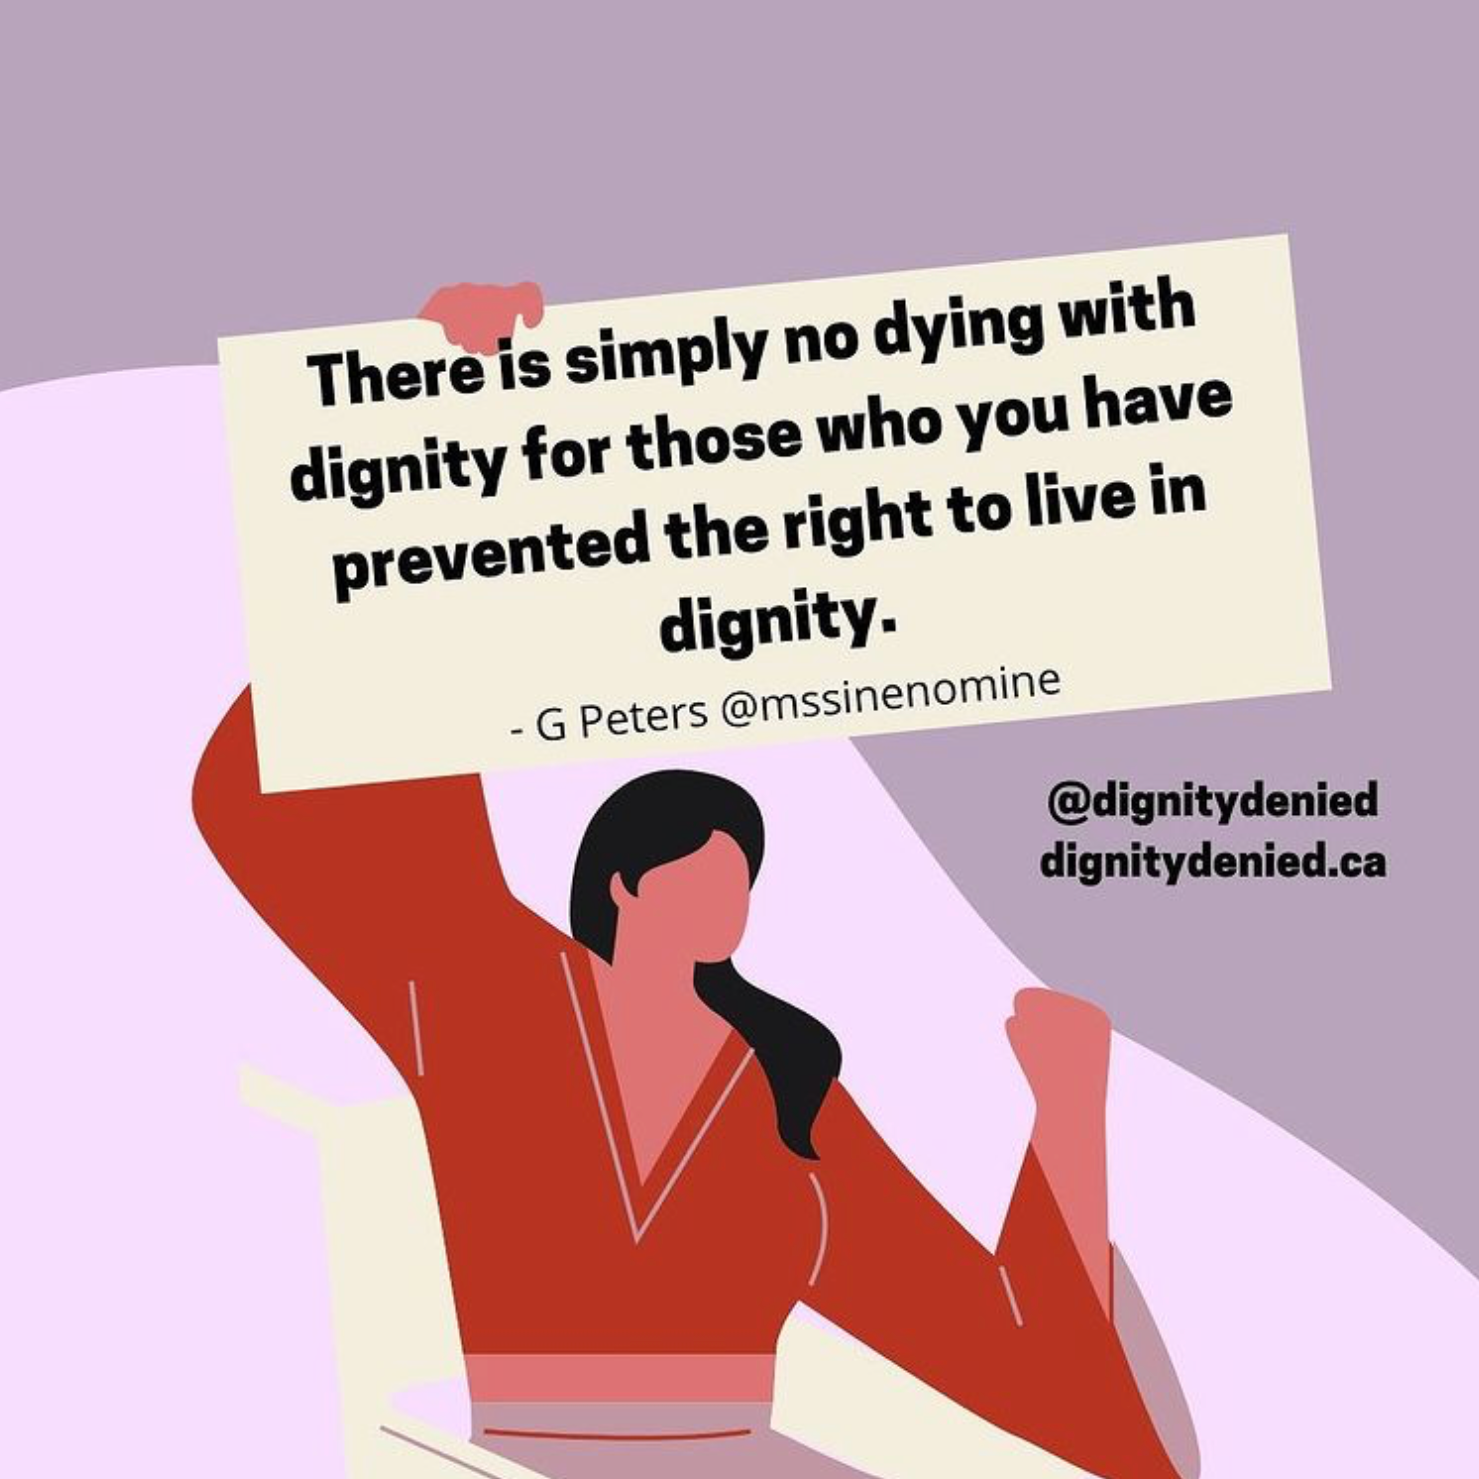 ID: A person with long black hair wearing a v-neck shirt sitting on a grey-white wheelchair. They are holding a picket sign that says: There is simply no dying with dignity for those who you have prevented the right to live in dignity. By G Peters @mssinenomine on Twitter.